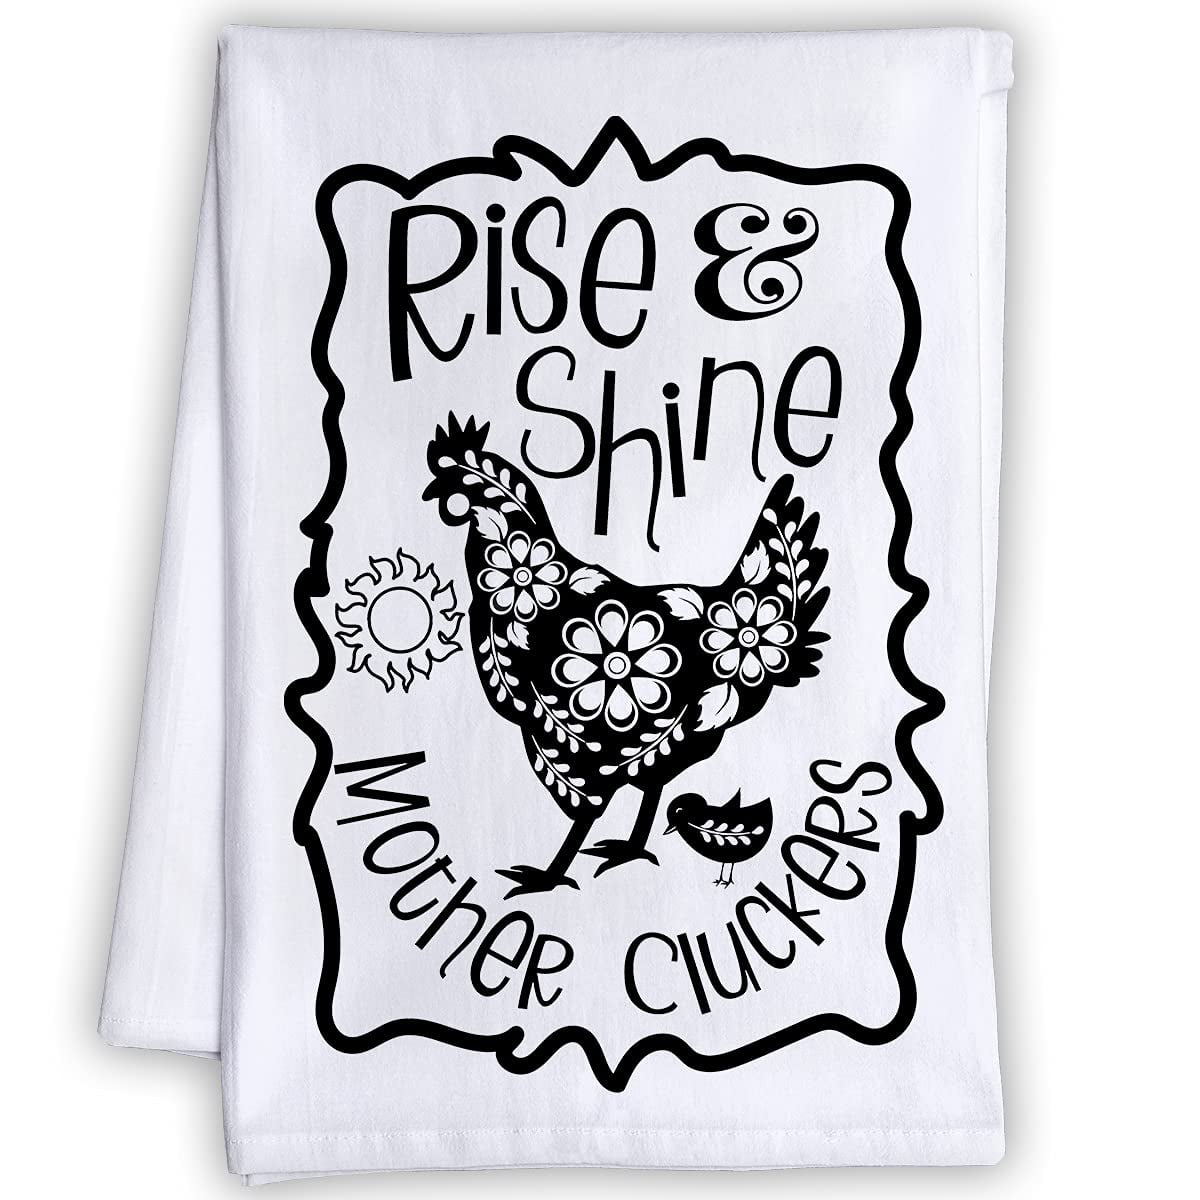 Rise & Shine Mother Cluckers Funny Kitchen Tea Towels Humorous Flour Sack Dish Towel Great Housewarming Gift and Fun Kitchen Decor 